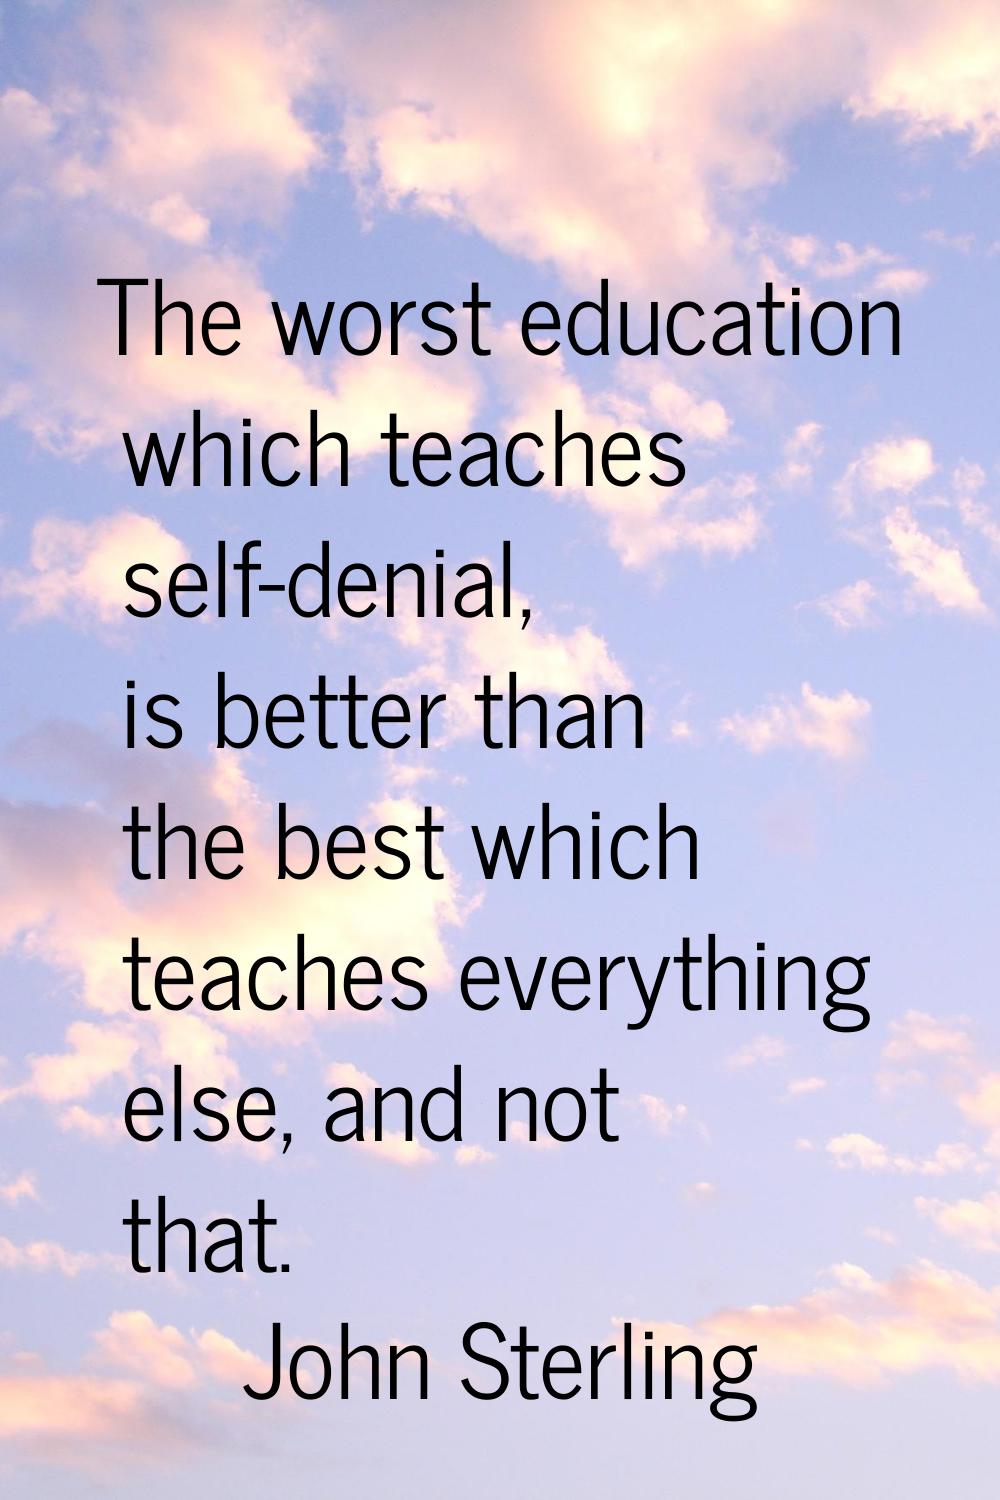 The worst education which teaches self-denial, is better than the best which teaches everything els